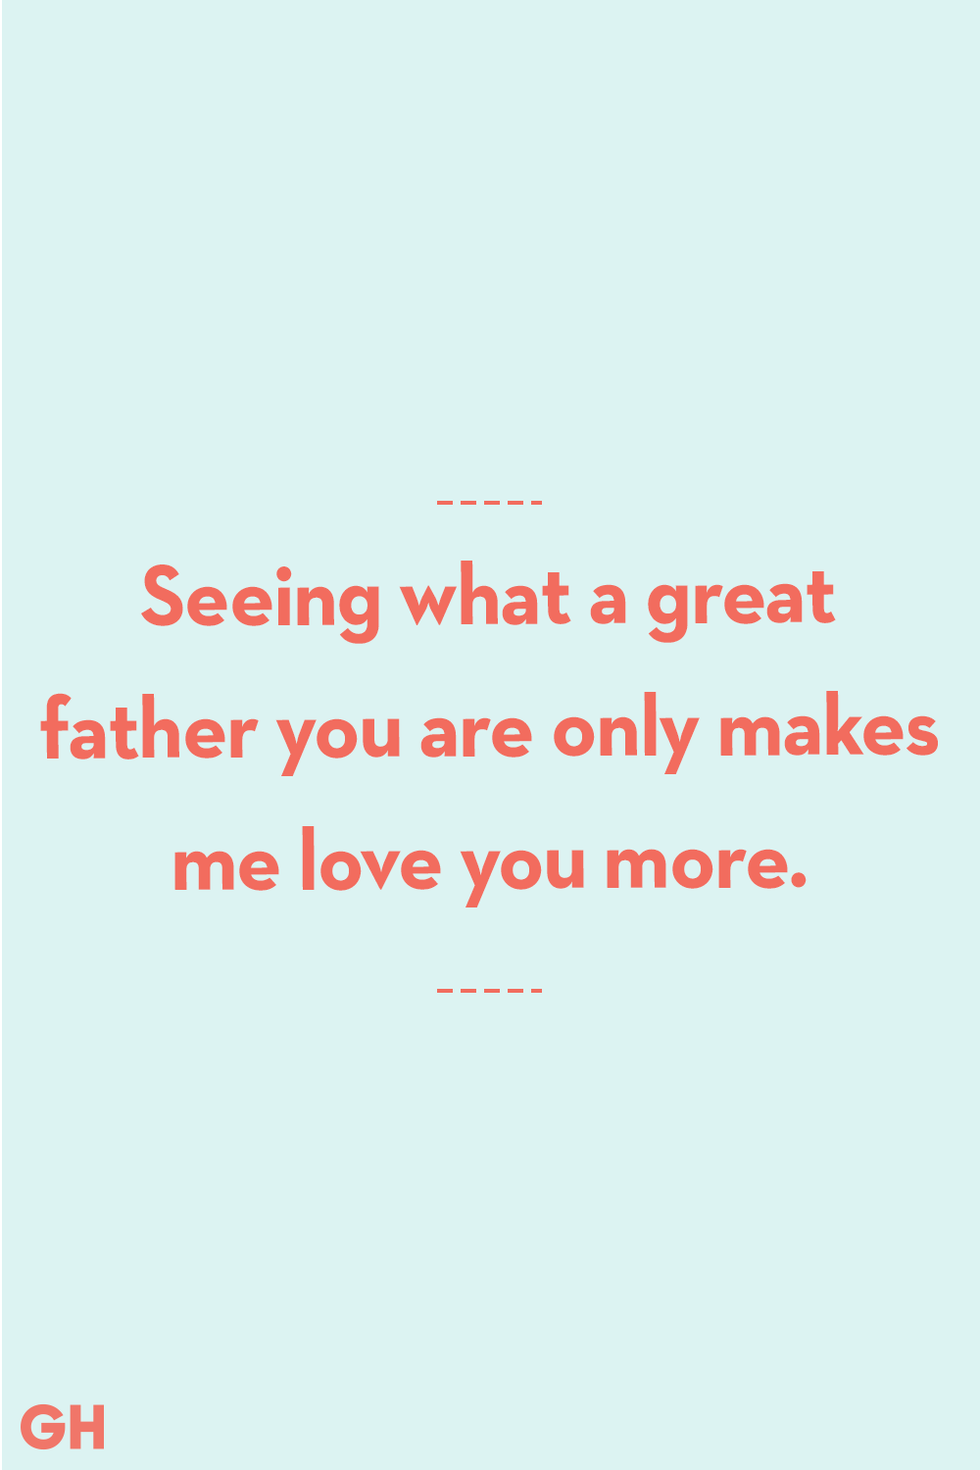 father's day quotes from wife